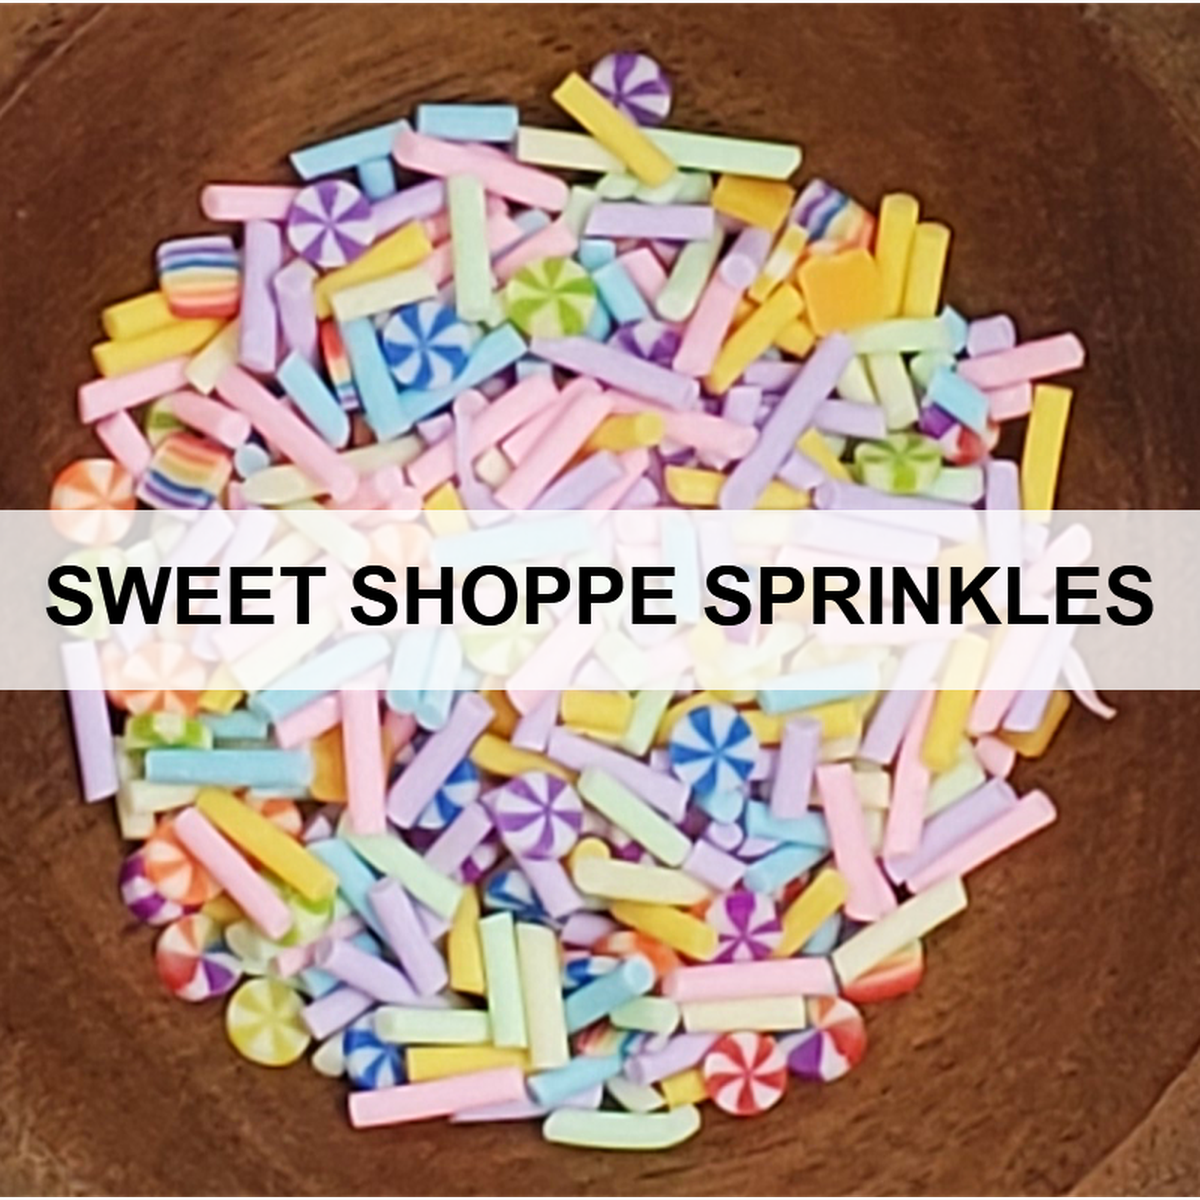 Sweet Shoppe Sprinkles by Kat Scrappiness - Kat Scrappiness